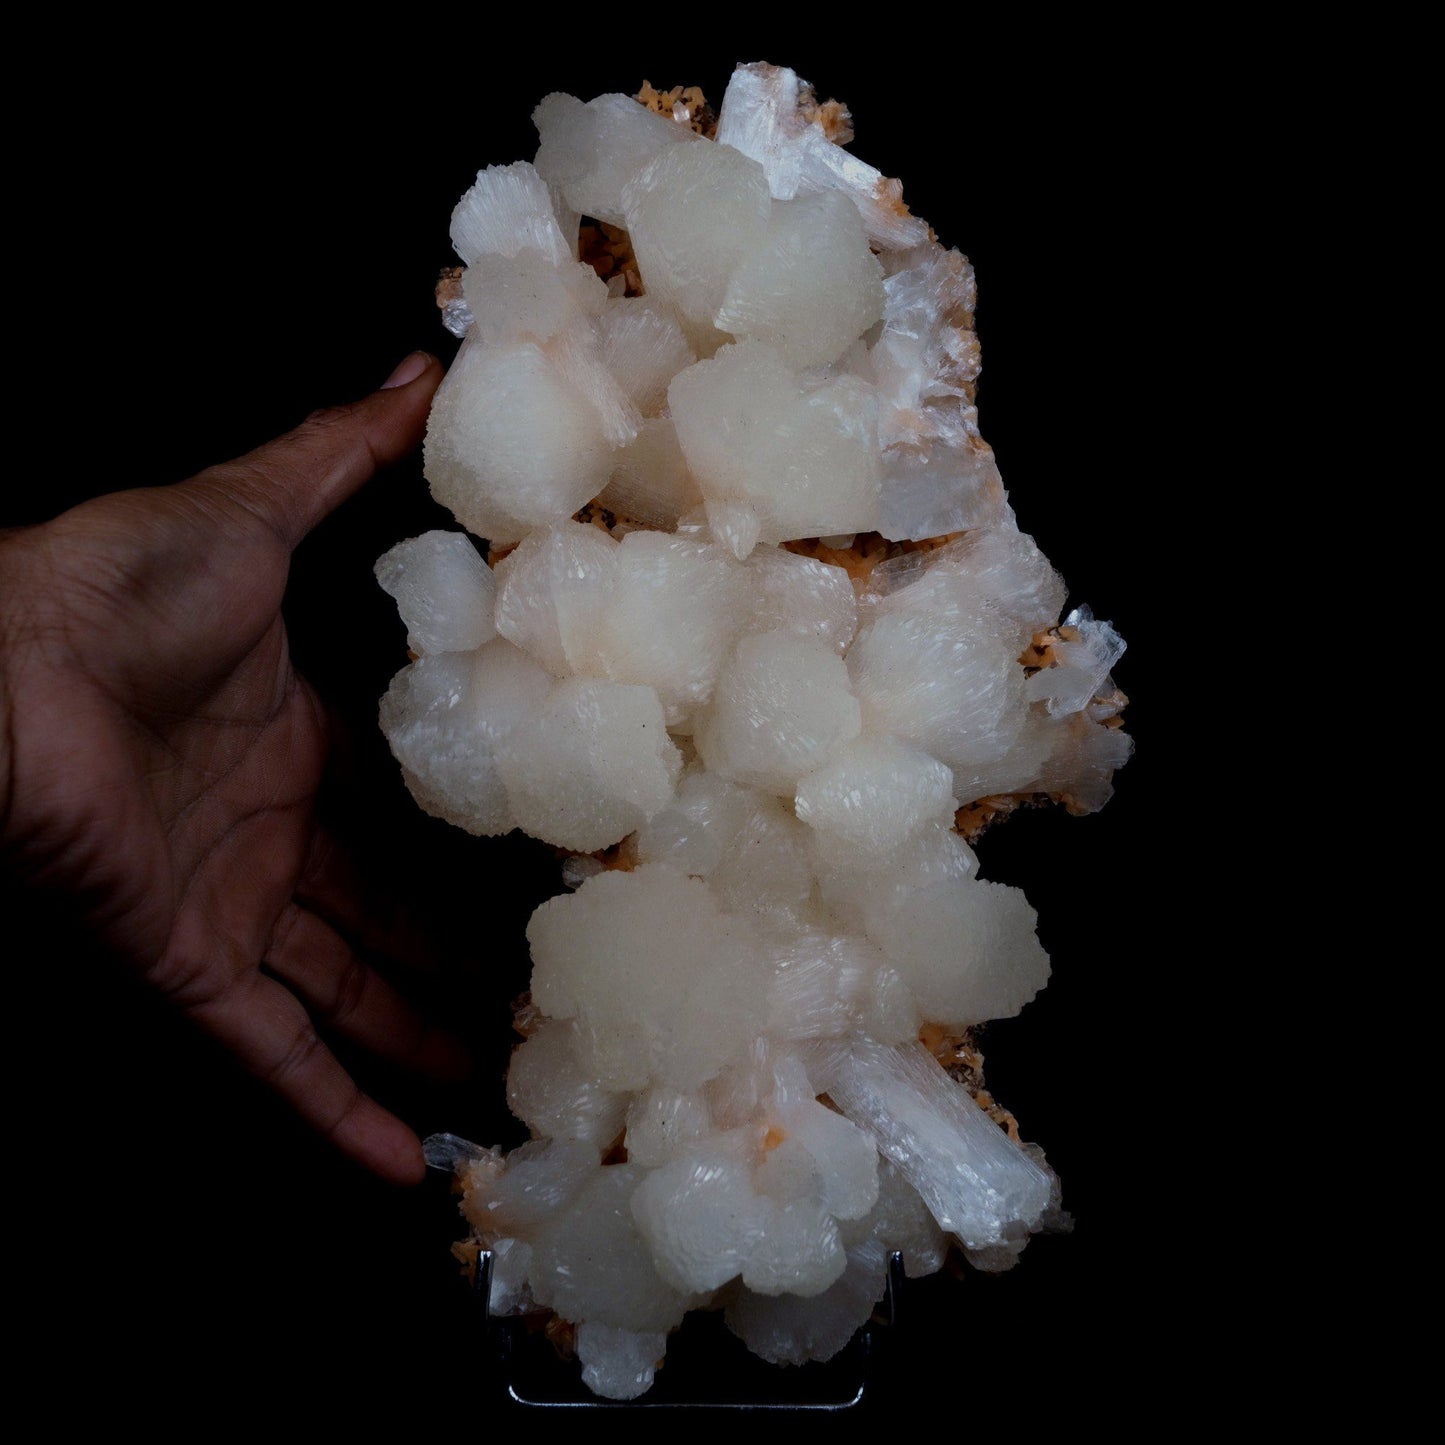 Stilbite on Heulandite Natural Mineral Specimen # B 4729  https://www.superbminerals.us/products/stilbite-on-heulandite-natural-mineral-specimen-b-4729  Features: Featuring many excellent quality bladed groups of Stilbite in a soft white hue, resting over pearly stalactitic formations of peach colored Heulandite, this piece is a stunning example of the material. The sculpture is really flashy and three-dimensional, and I particularly like how the Stilbites